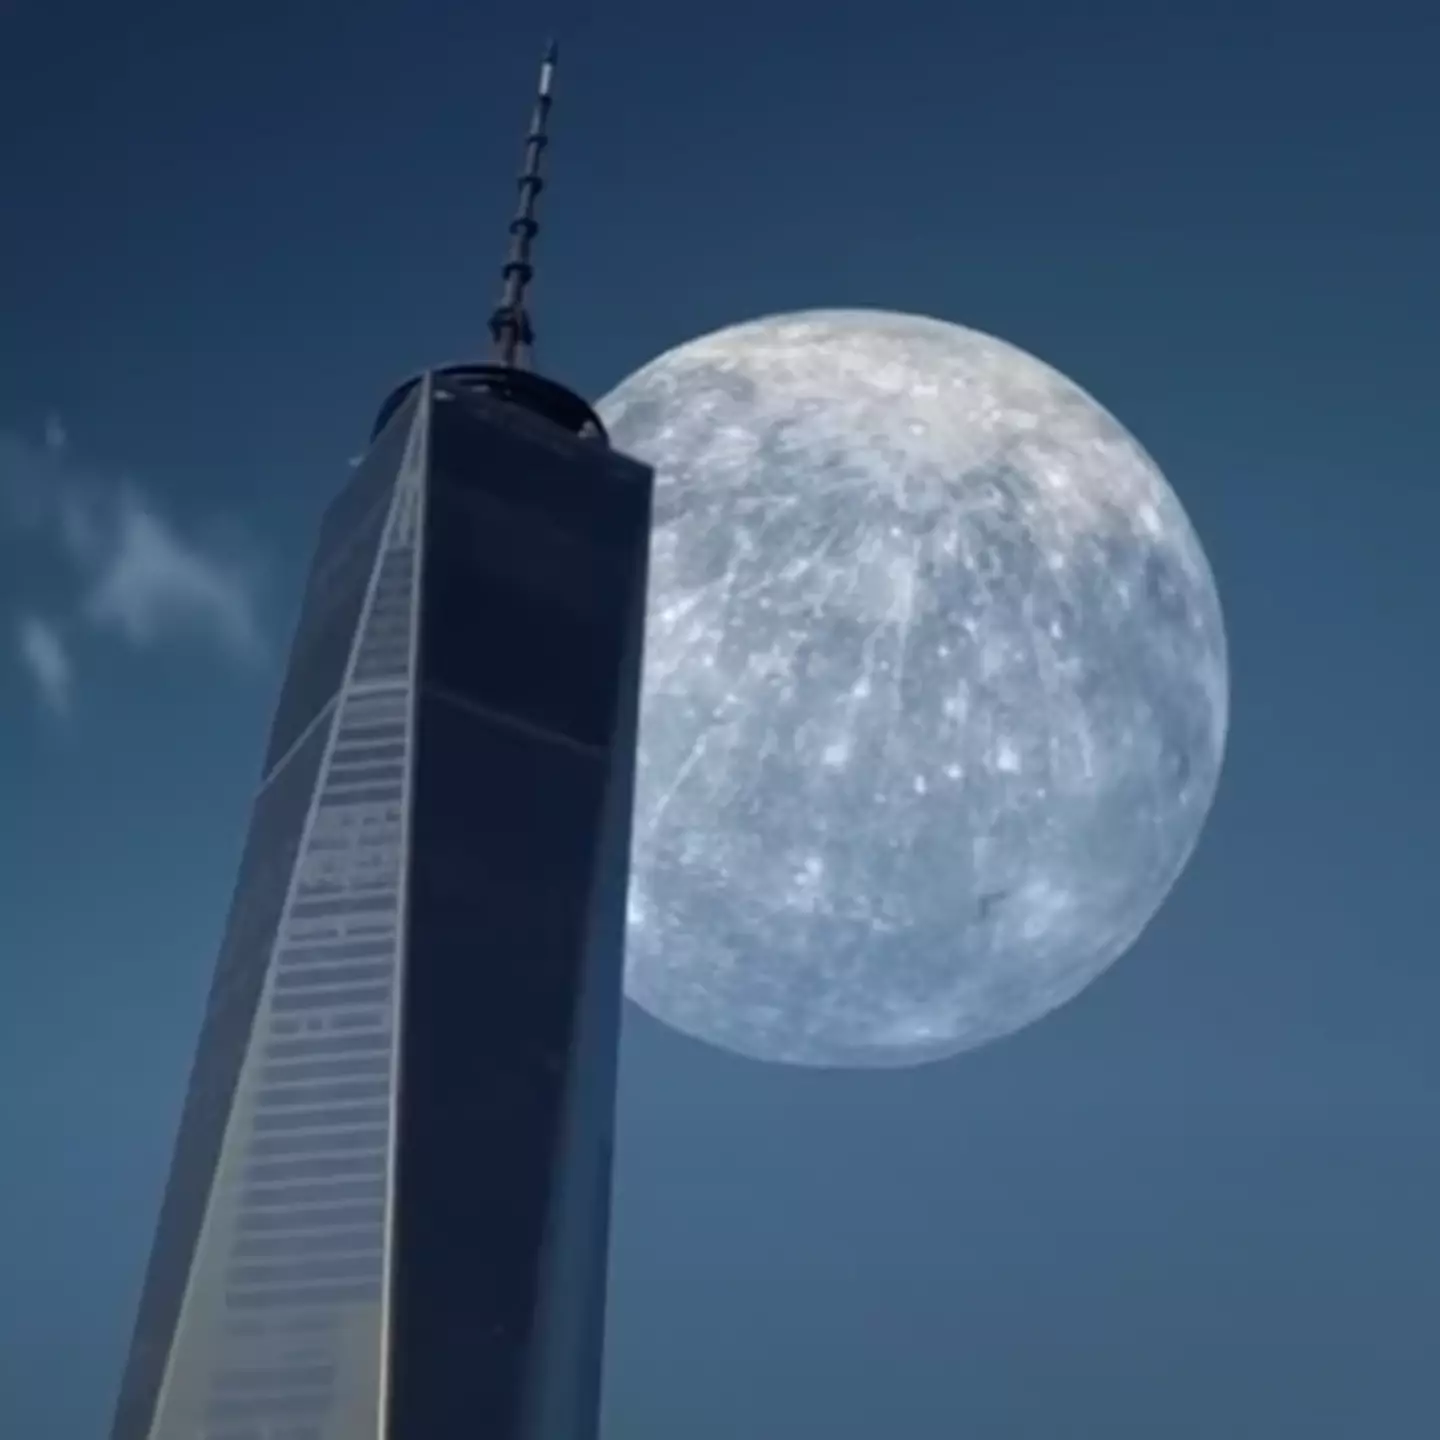 Video explains what would happen if each planet replaced our moon and the results would be catastrophic